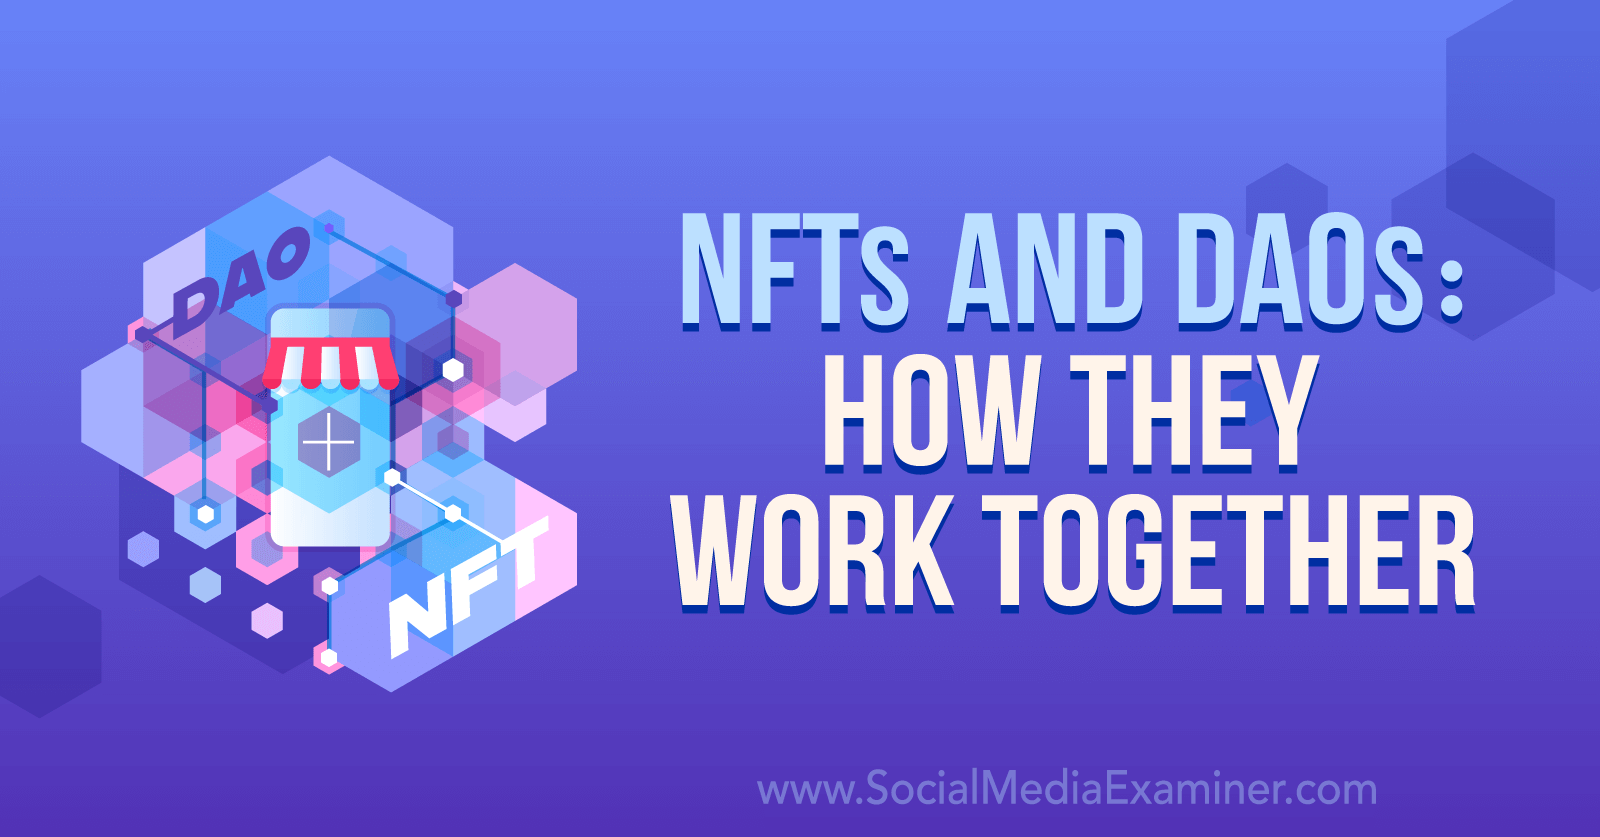 NFTs and DAOs: How They Work Together featuring insights from Travis Wright on the Crypto Business Podcast.